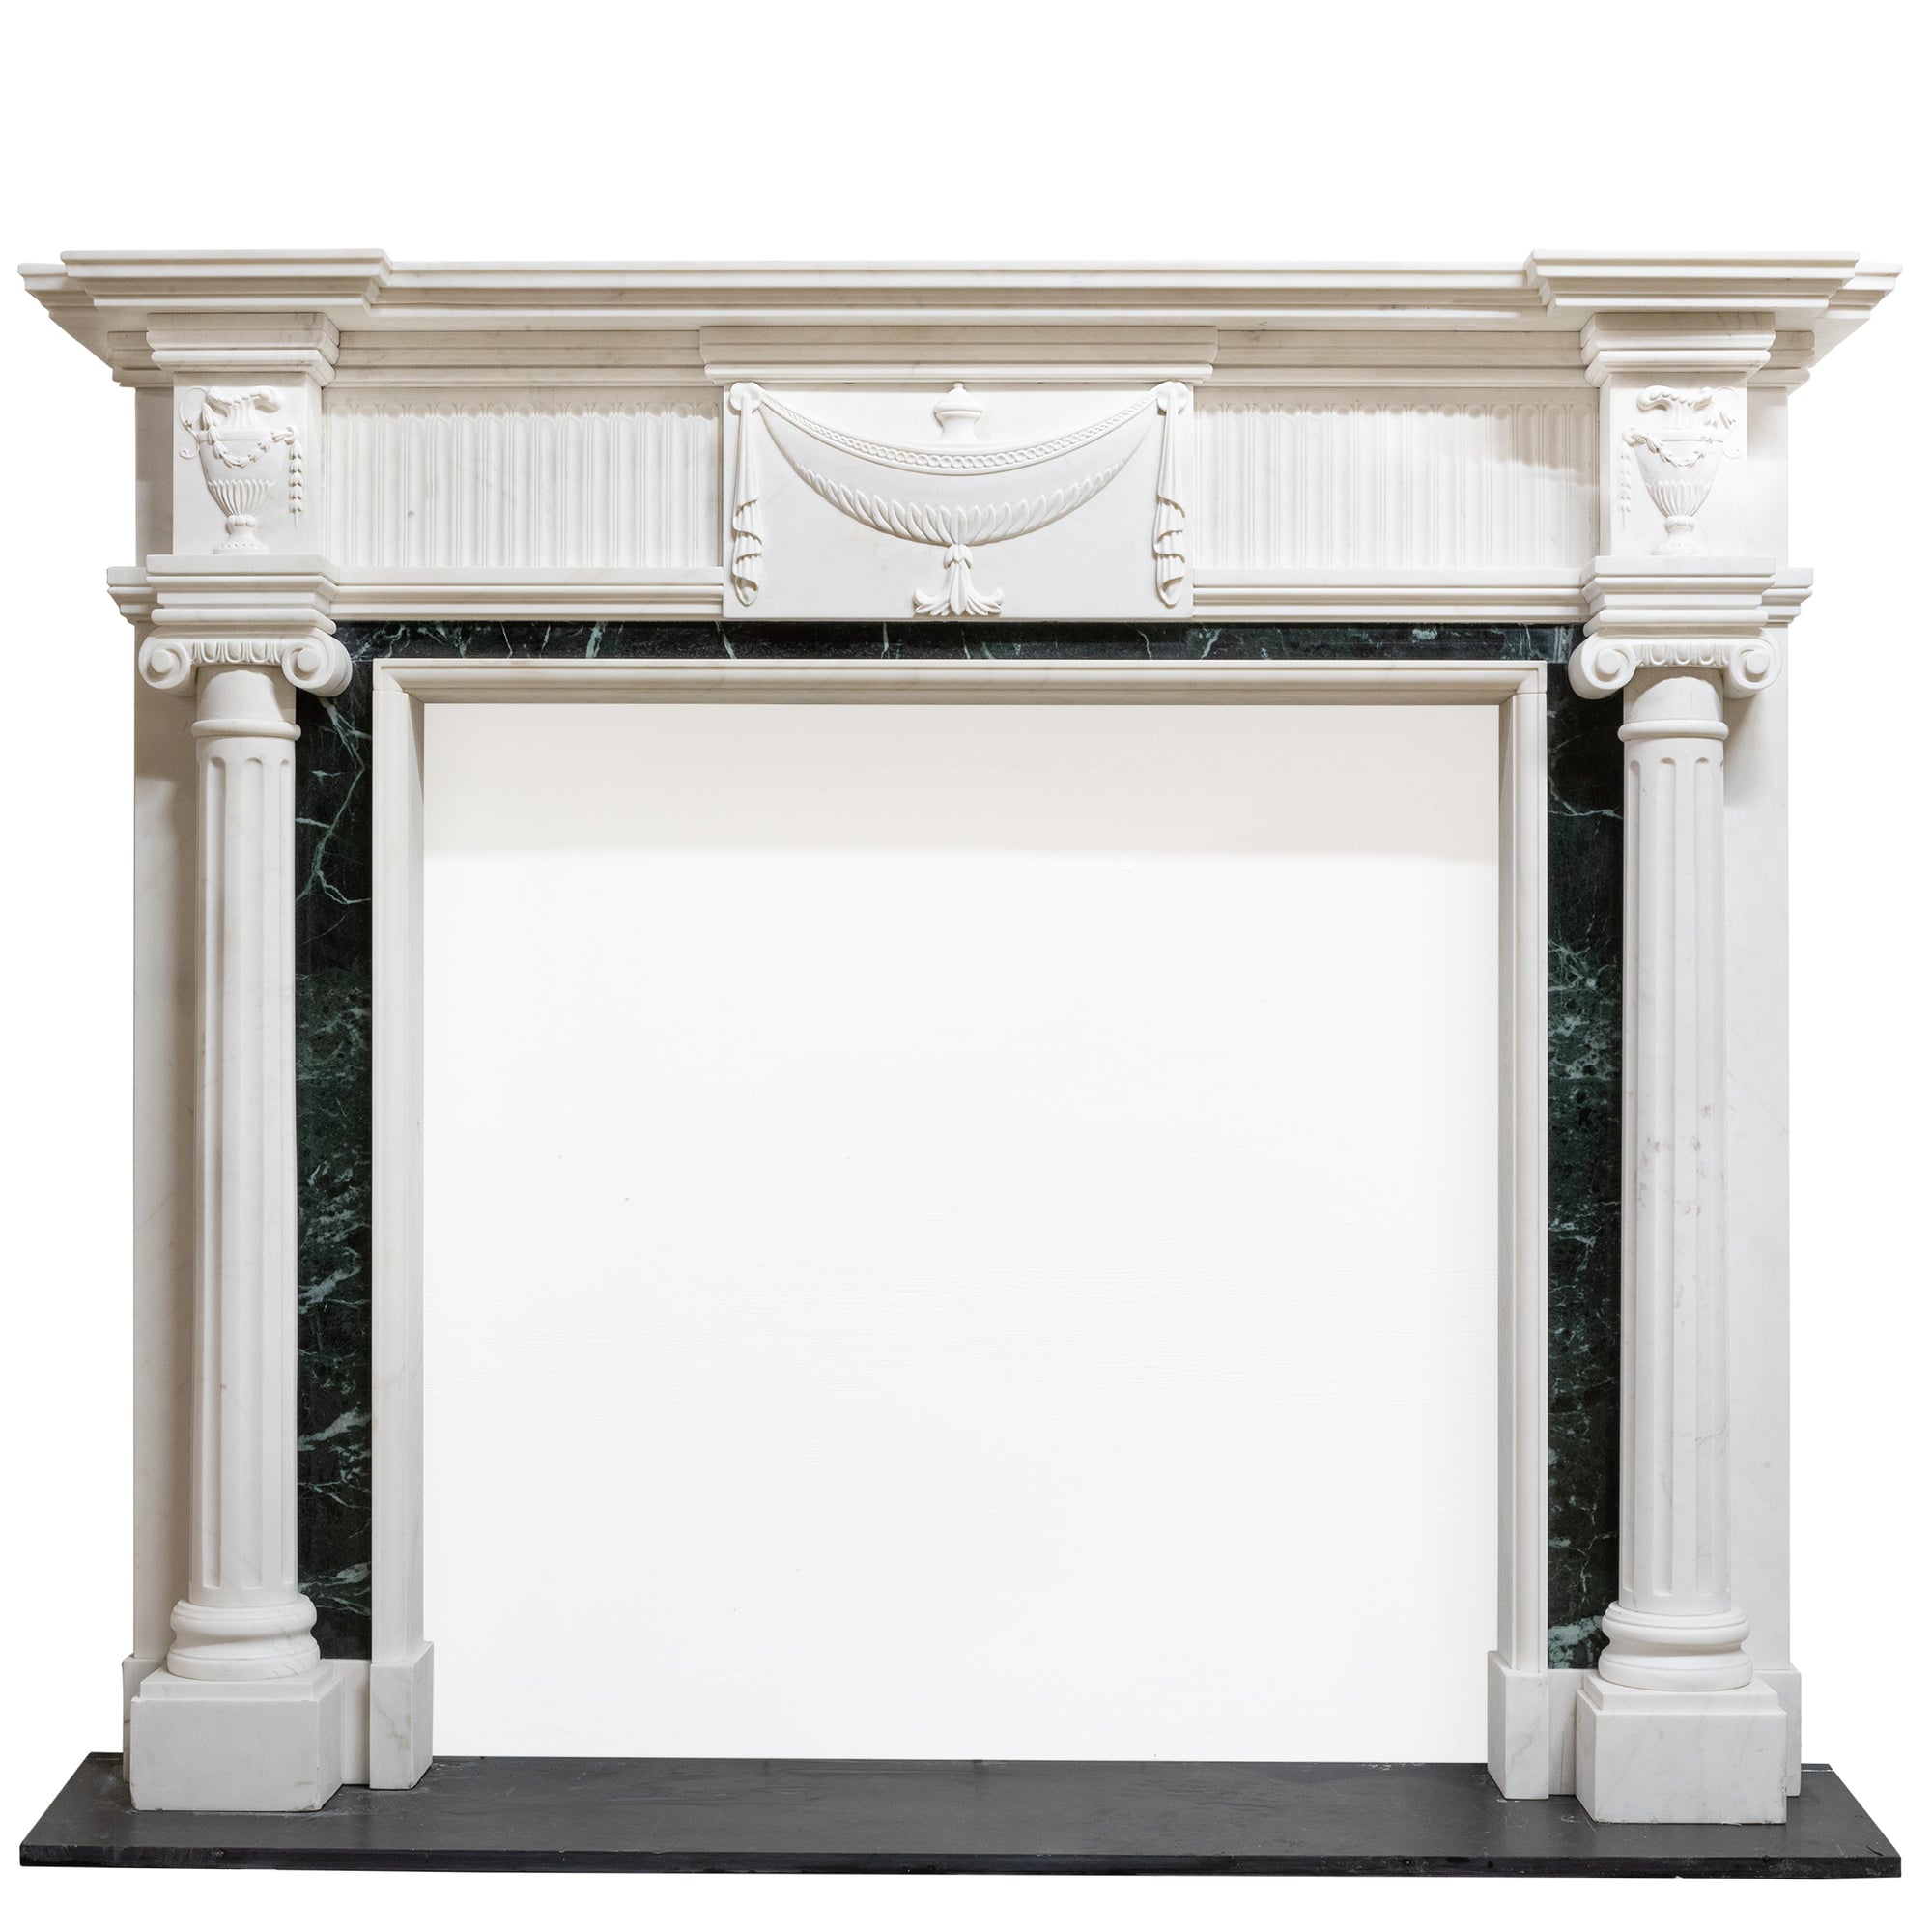 Regency Style Statuary & Verde Marble Chimneypiece | The Architectural Forum